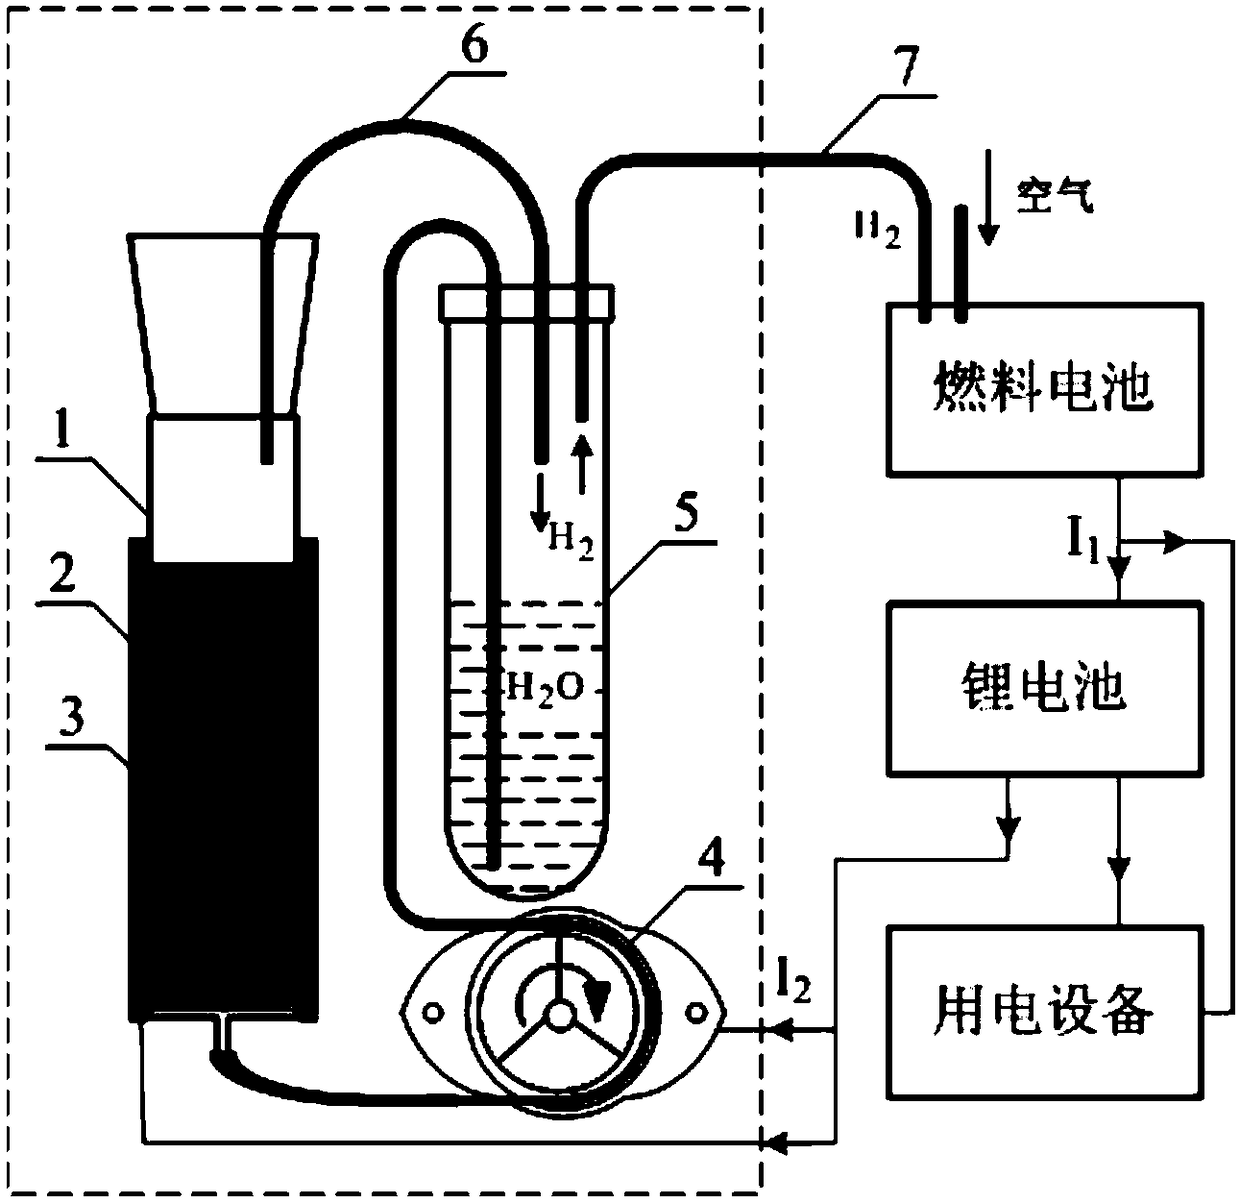 Atmospheric pressure hydrogen reaction device and hydrogen fuel cell power supply system